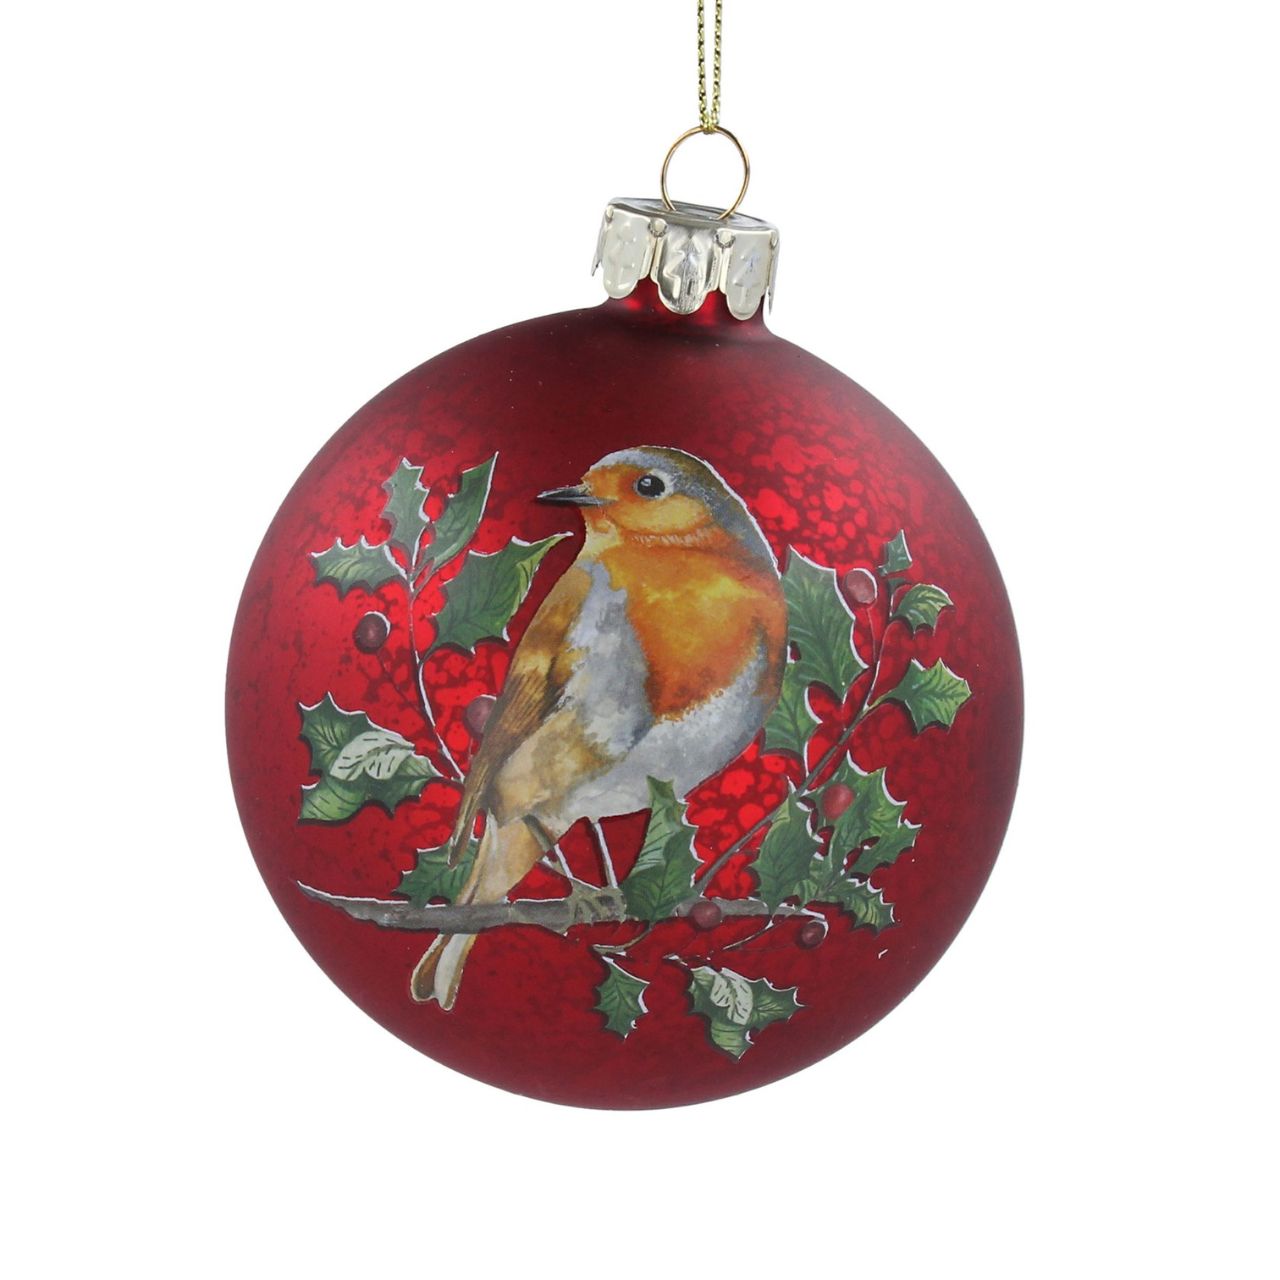 Gisela Graham Christmas Baubles - Antique Red with Robin Large  This Gisela Graham Christmas Baubles is perfect for your festive holiday décor. Featuring an Antique Red glaze and a beautiful painted Robin design, these classic decorations will bring a subtle elegance to your tree this season.